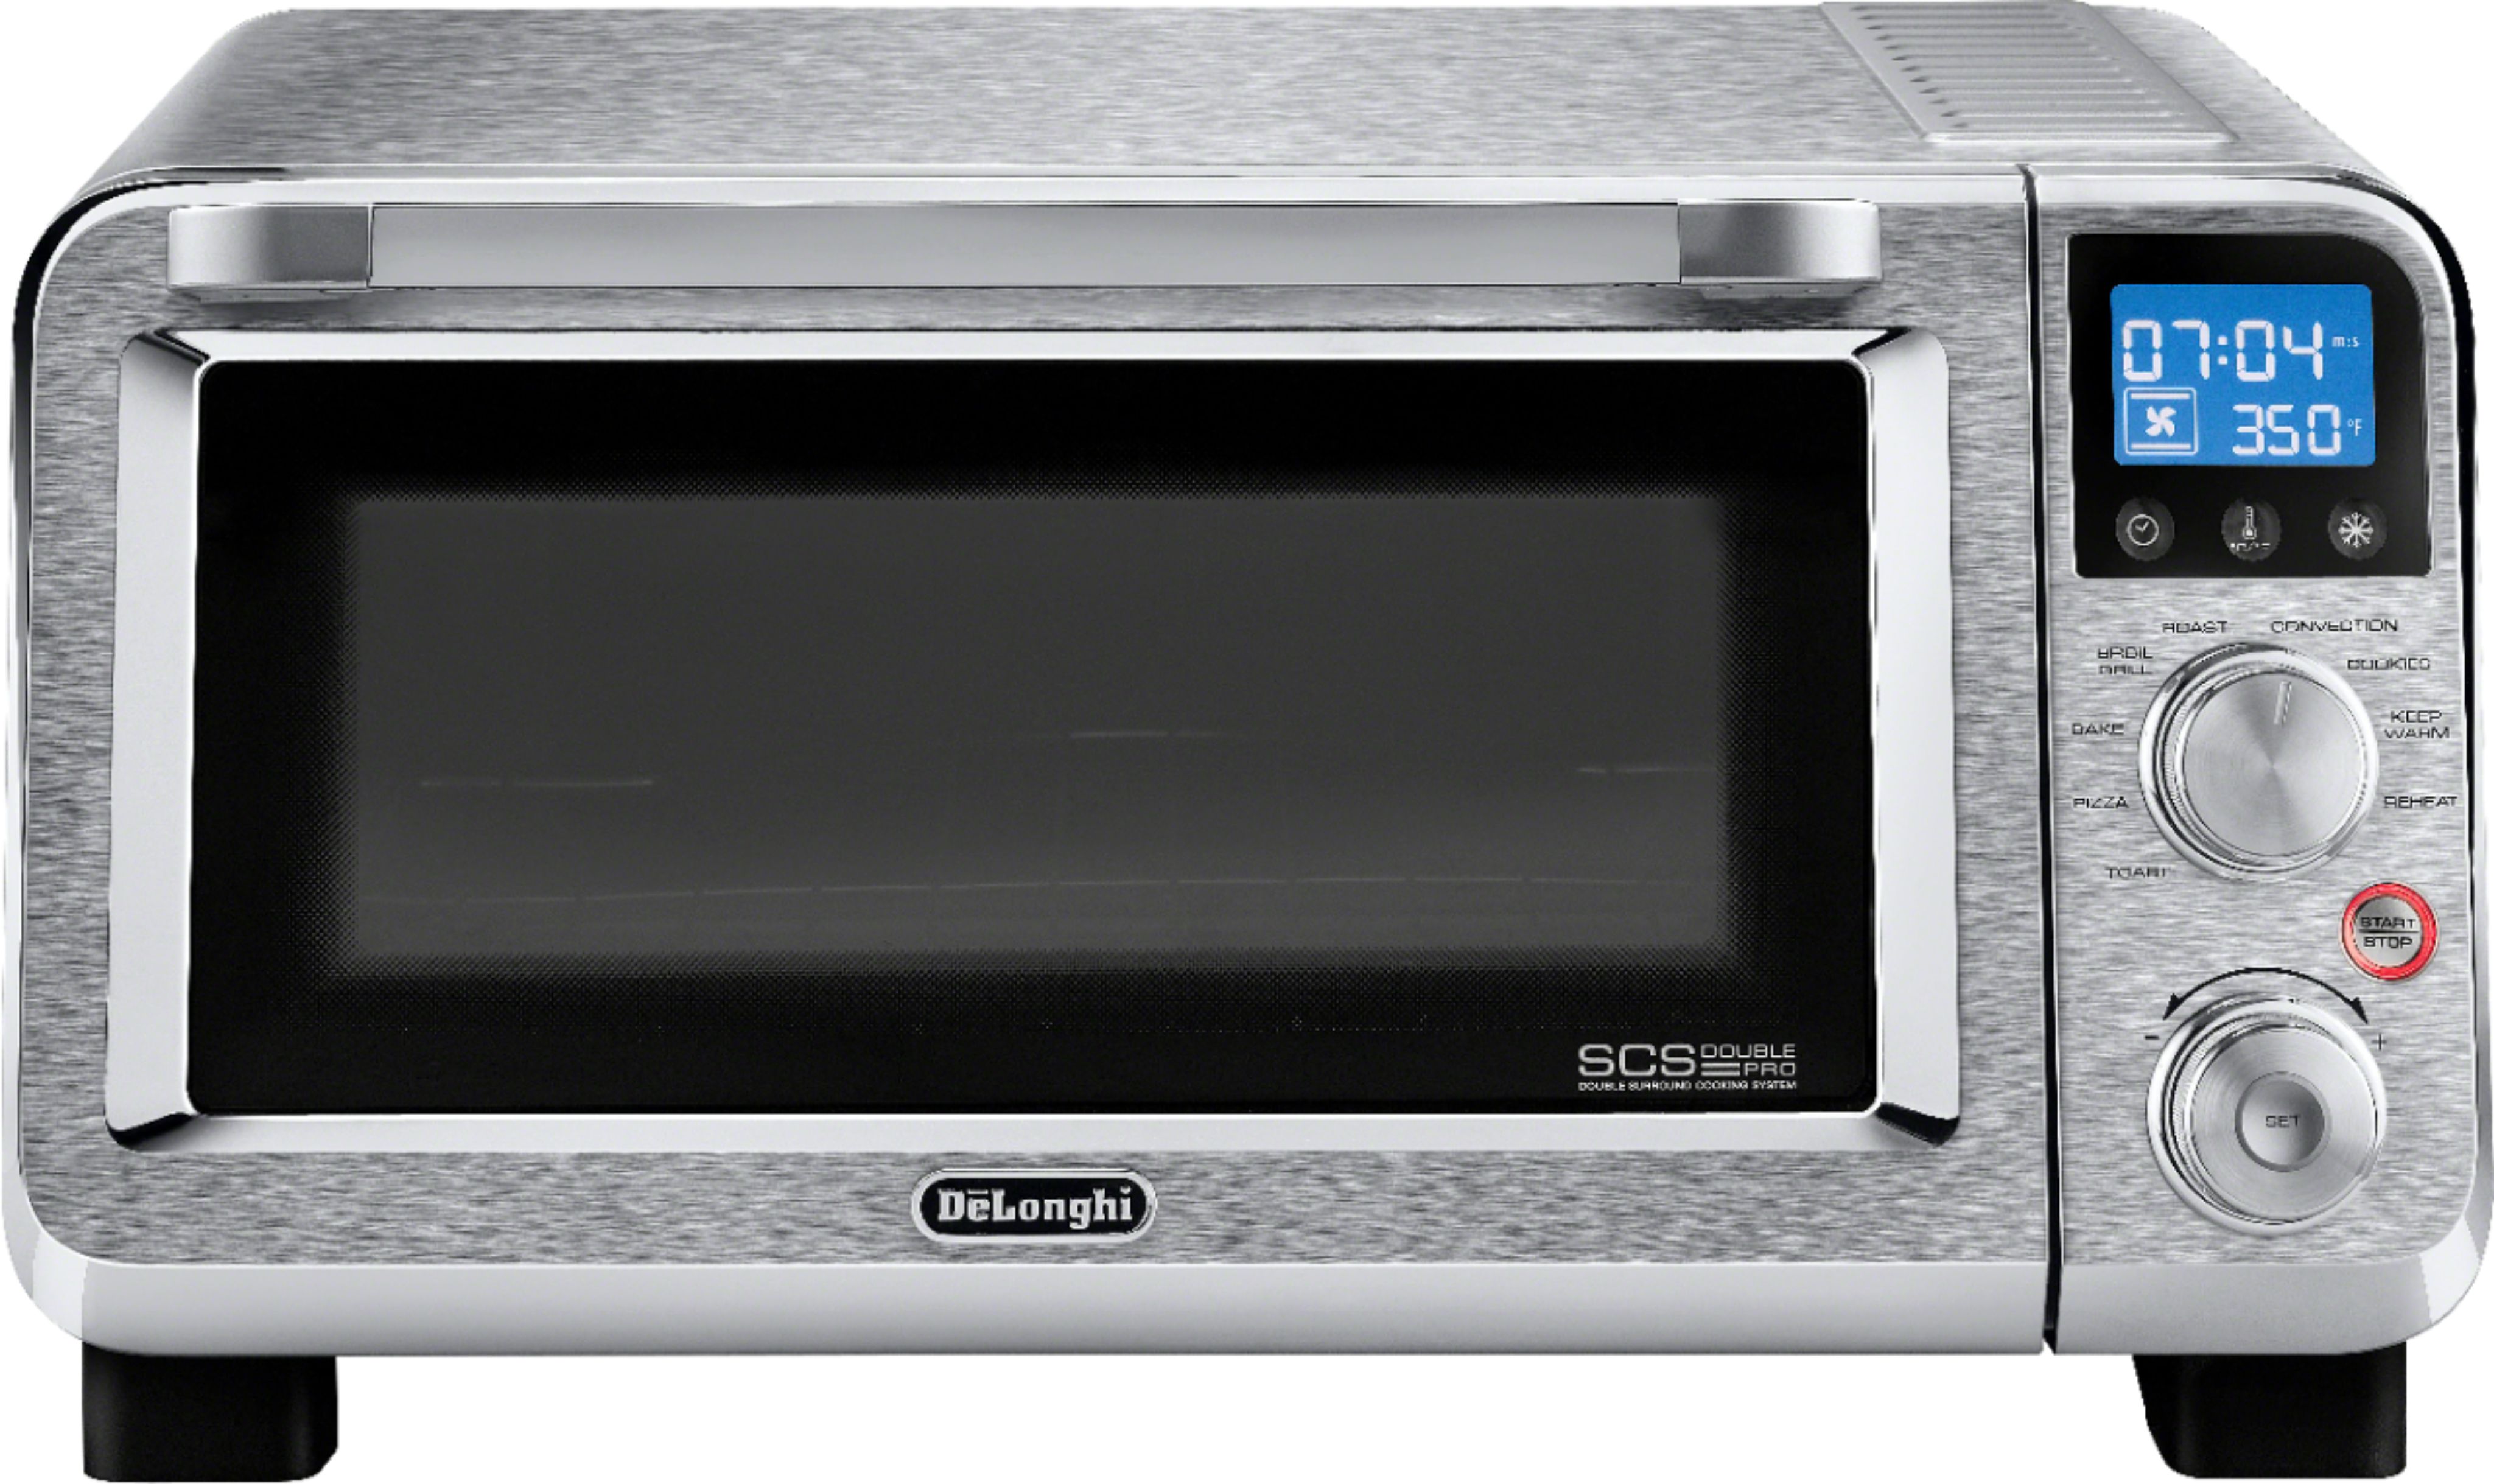  De'Longhi Small Convection Toaster Oven For Countertop With  internal light And 9 Preset Functions Including Pizza, Cookies, Roast,  Broil, Bake, Easy to Use, 14L, Stainless Steel, 1800W, EO141150M: Home &  Kitchen